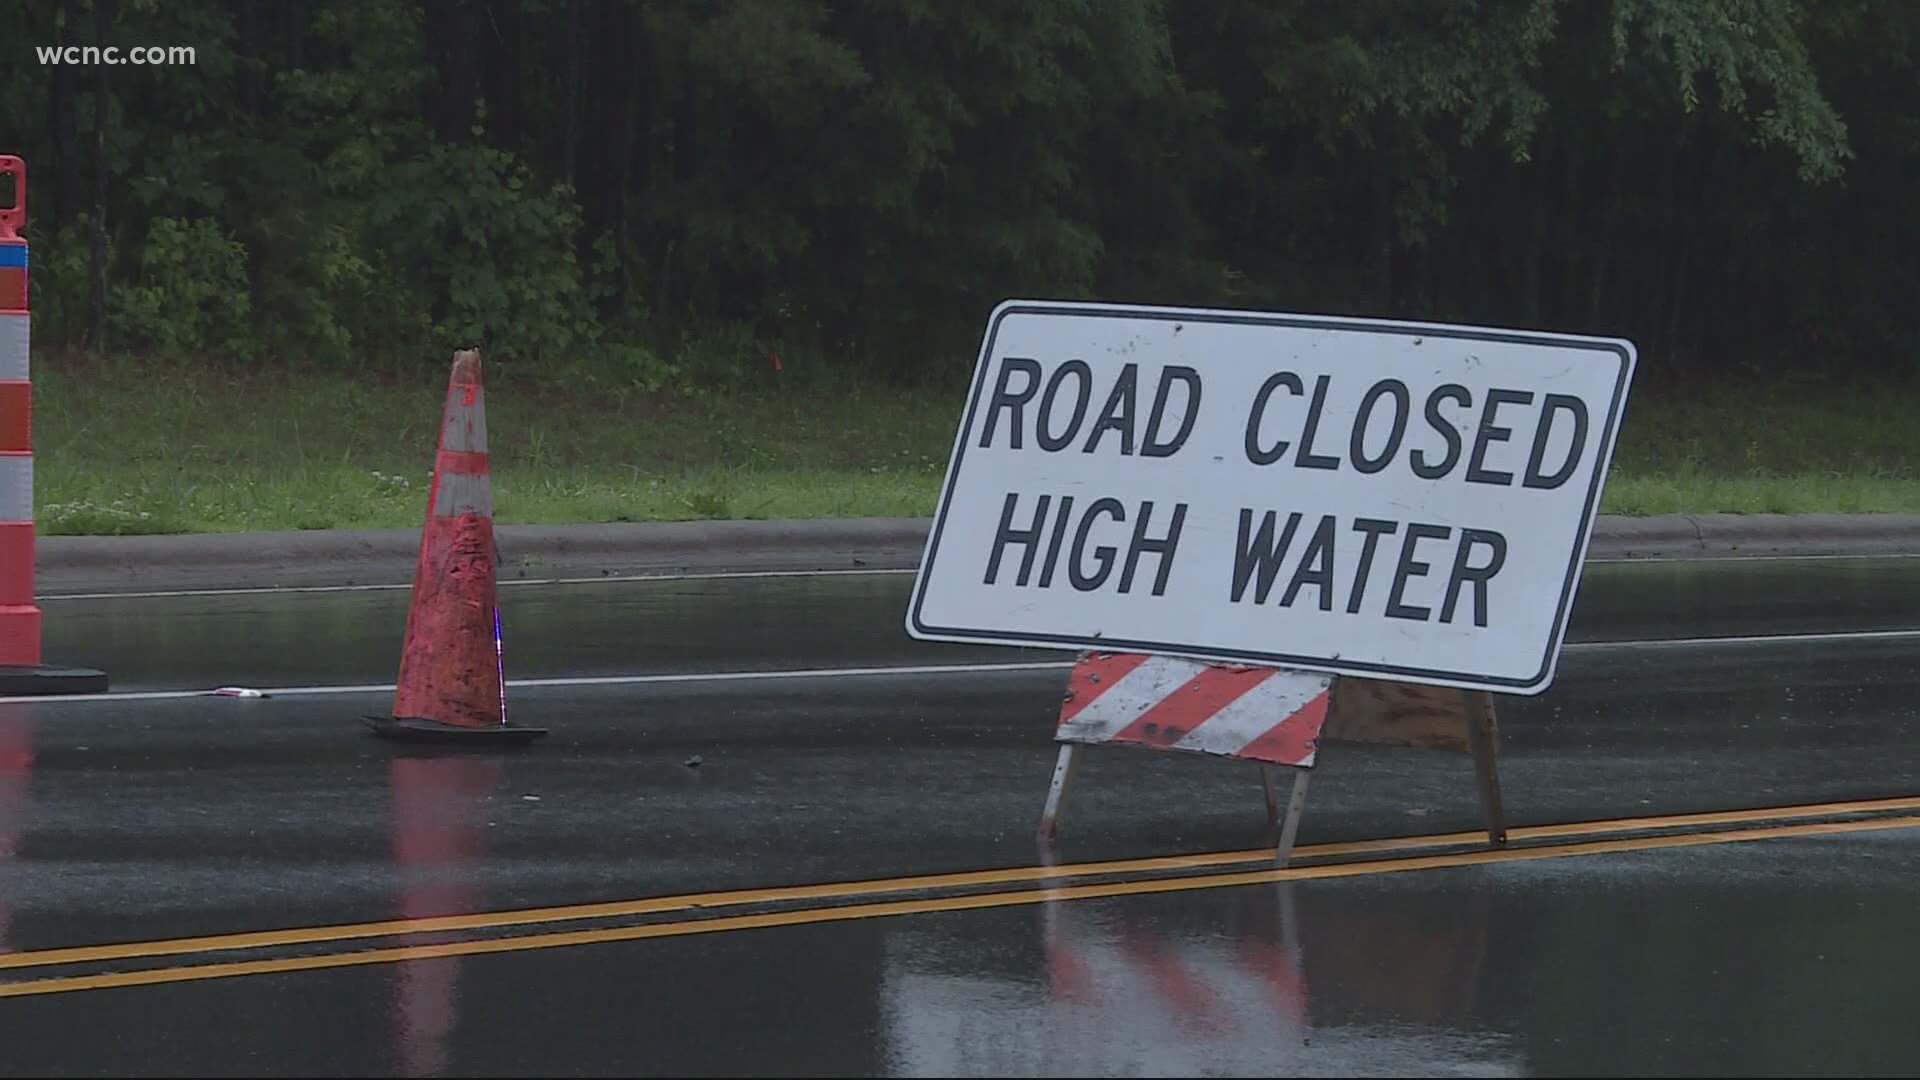 Since everything was already saturated, heavy rainfall Wednesday quickly led to flooding.